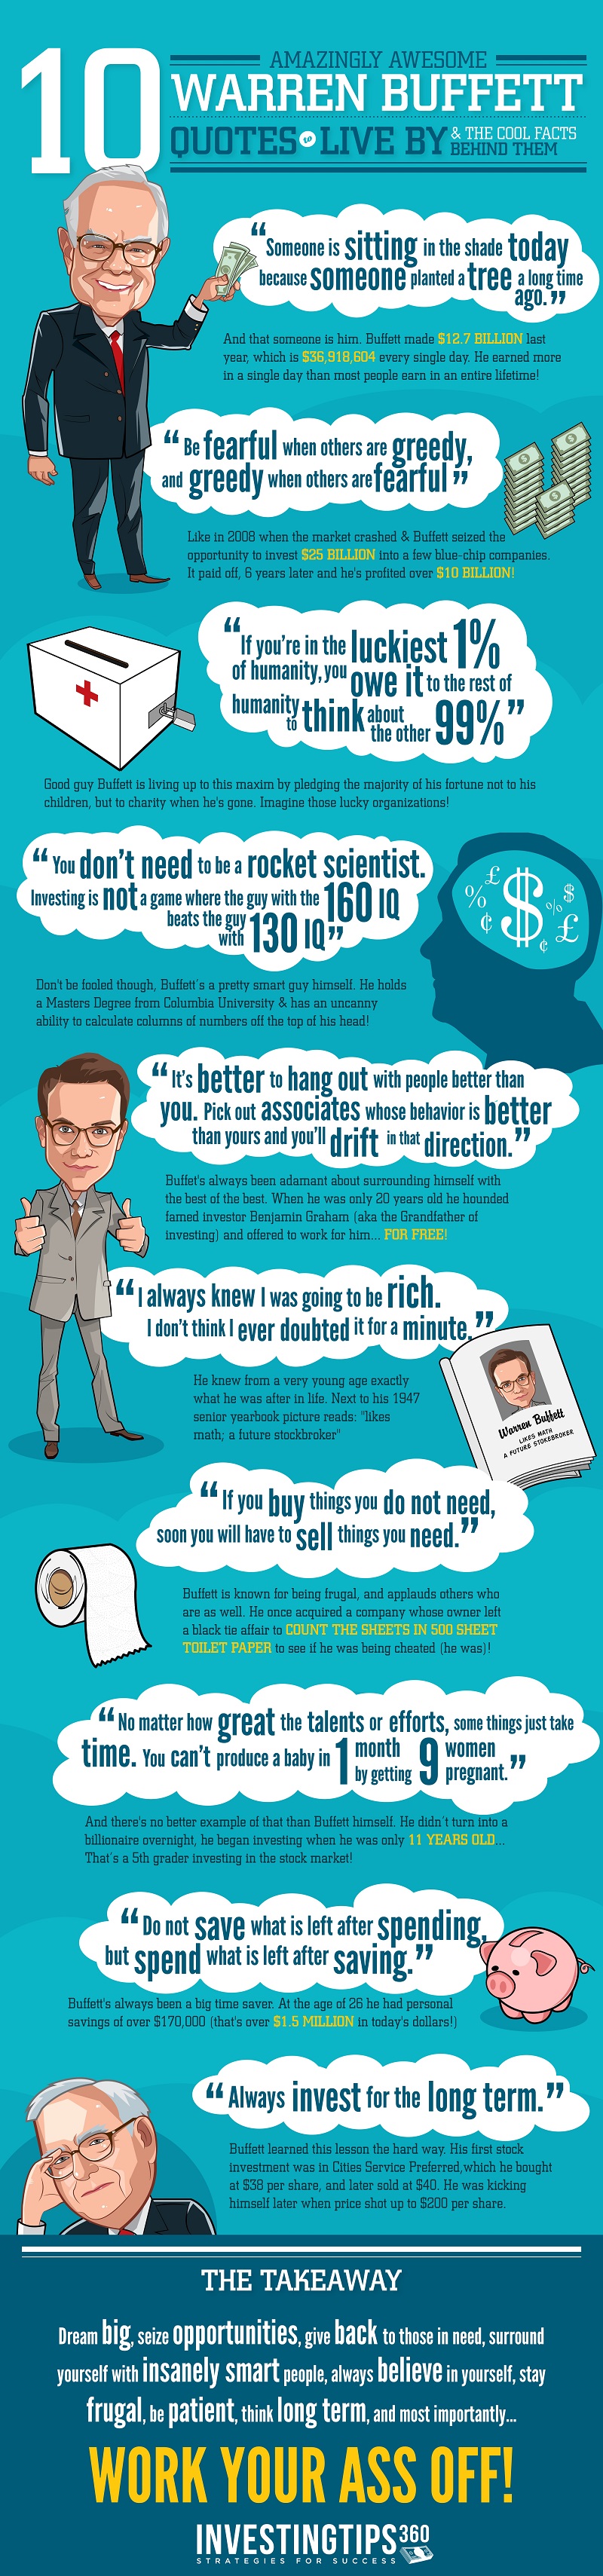 10 Amazingly Awesome Warren Buffett Quotes to Live By & The Cool Facts Behind Them!